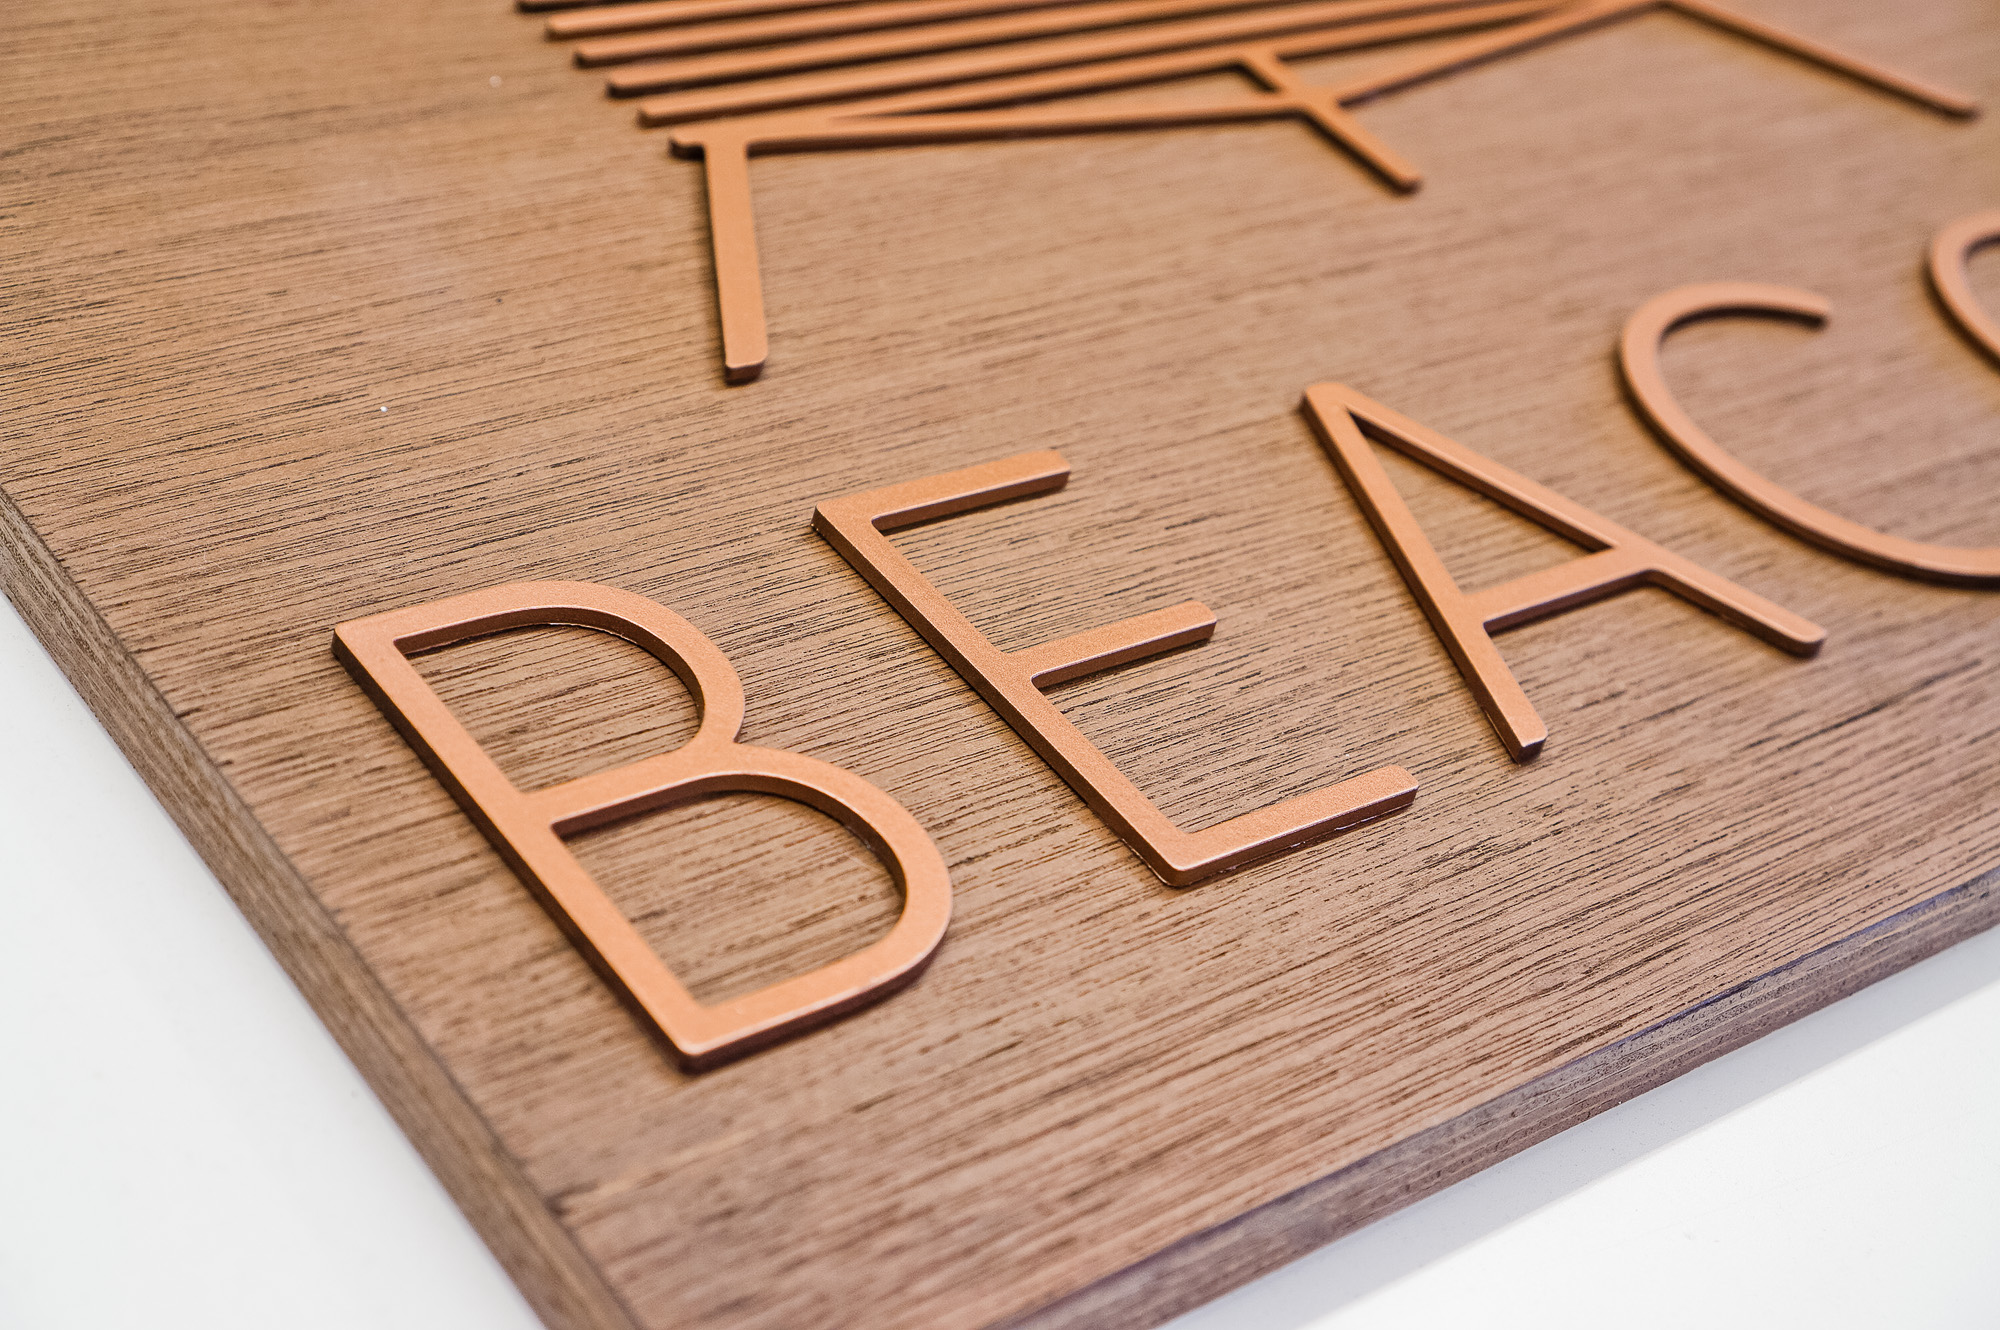 Metallic copper painted acrylic and dark wood outdoor sign for Beacon